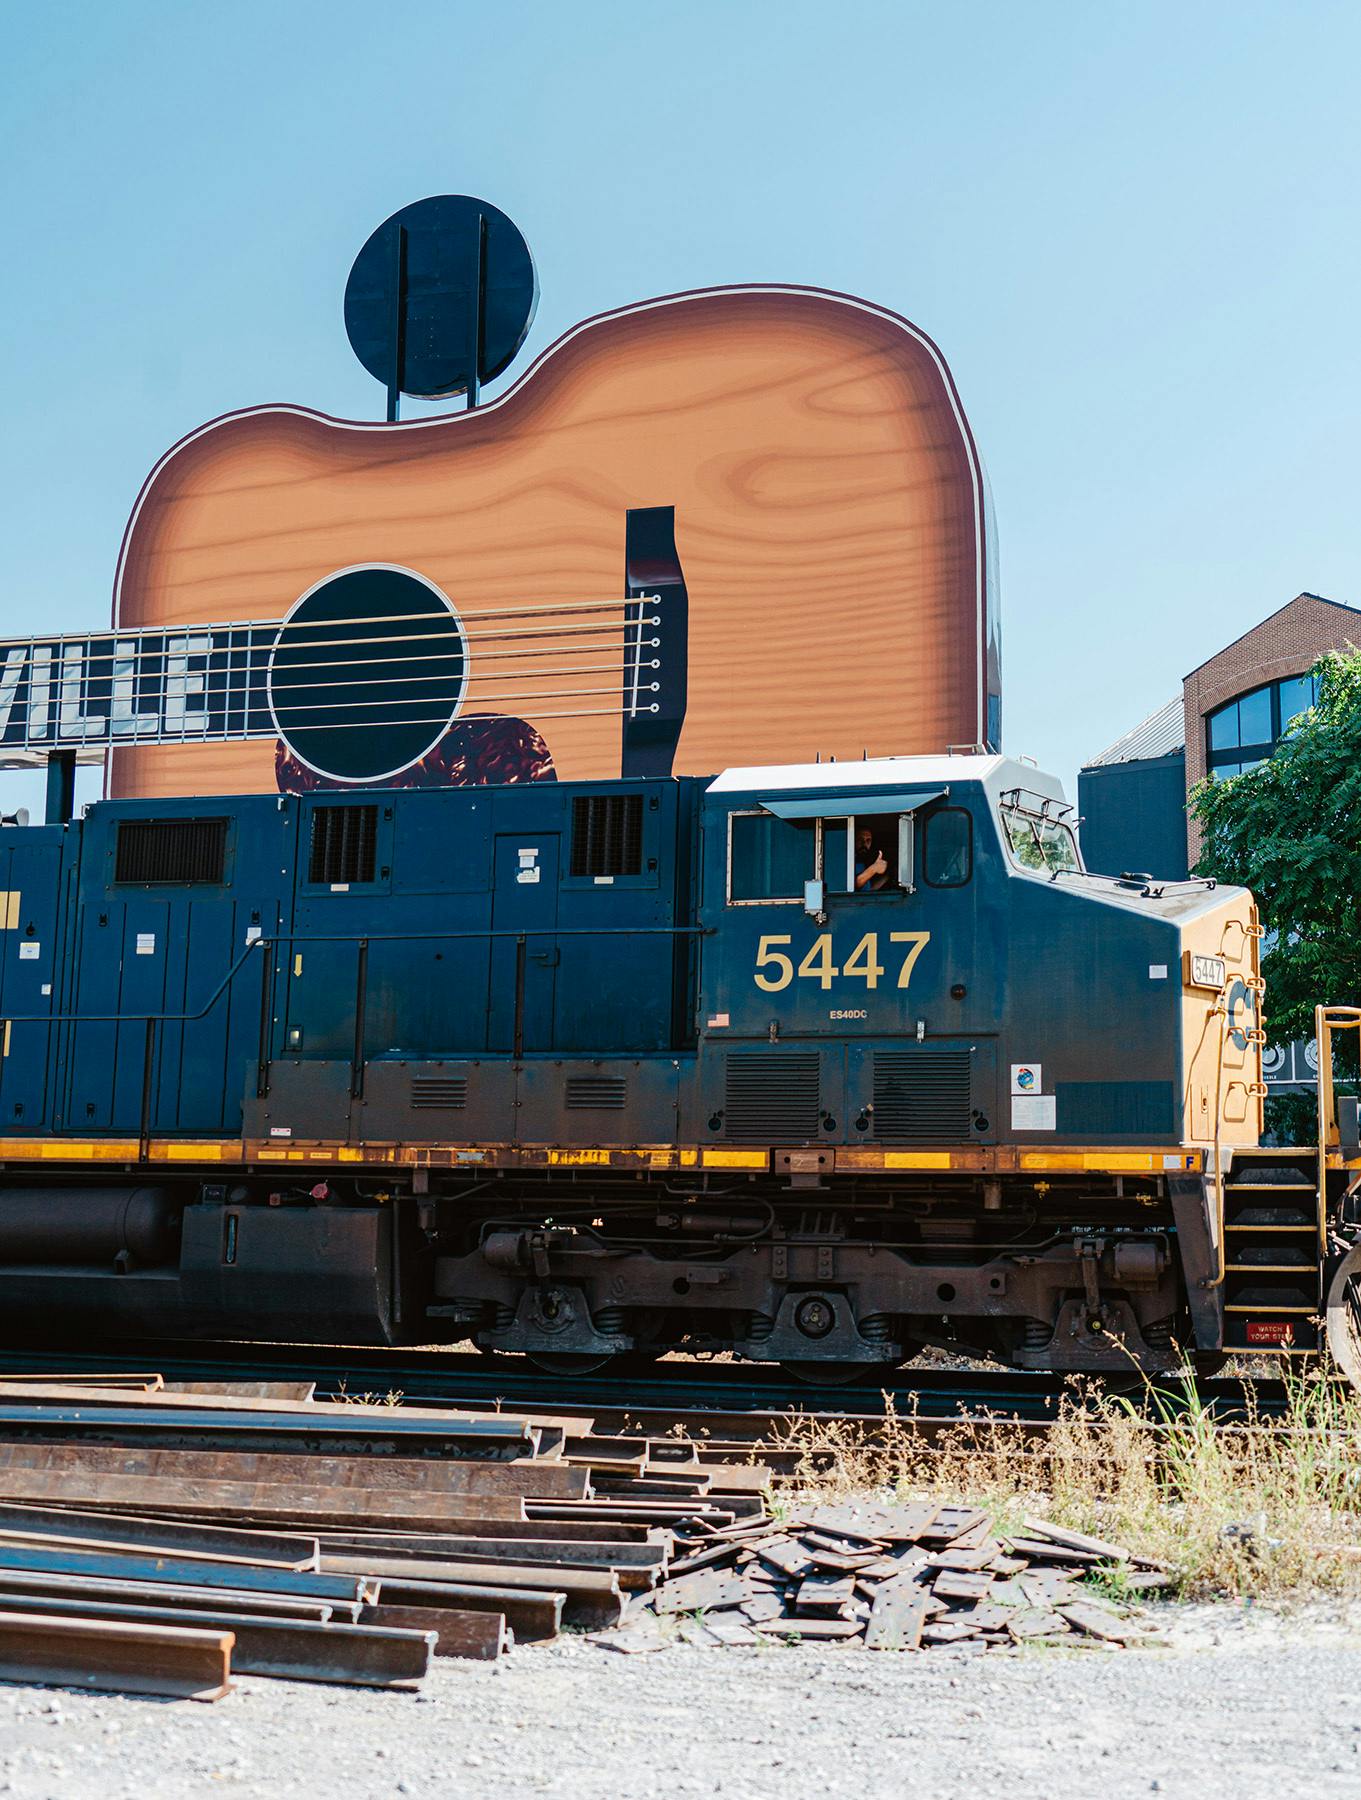 Nashville giant guitar sign and train located next to Memoir Wedgewood Houston's community